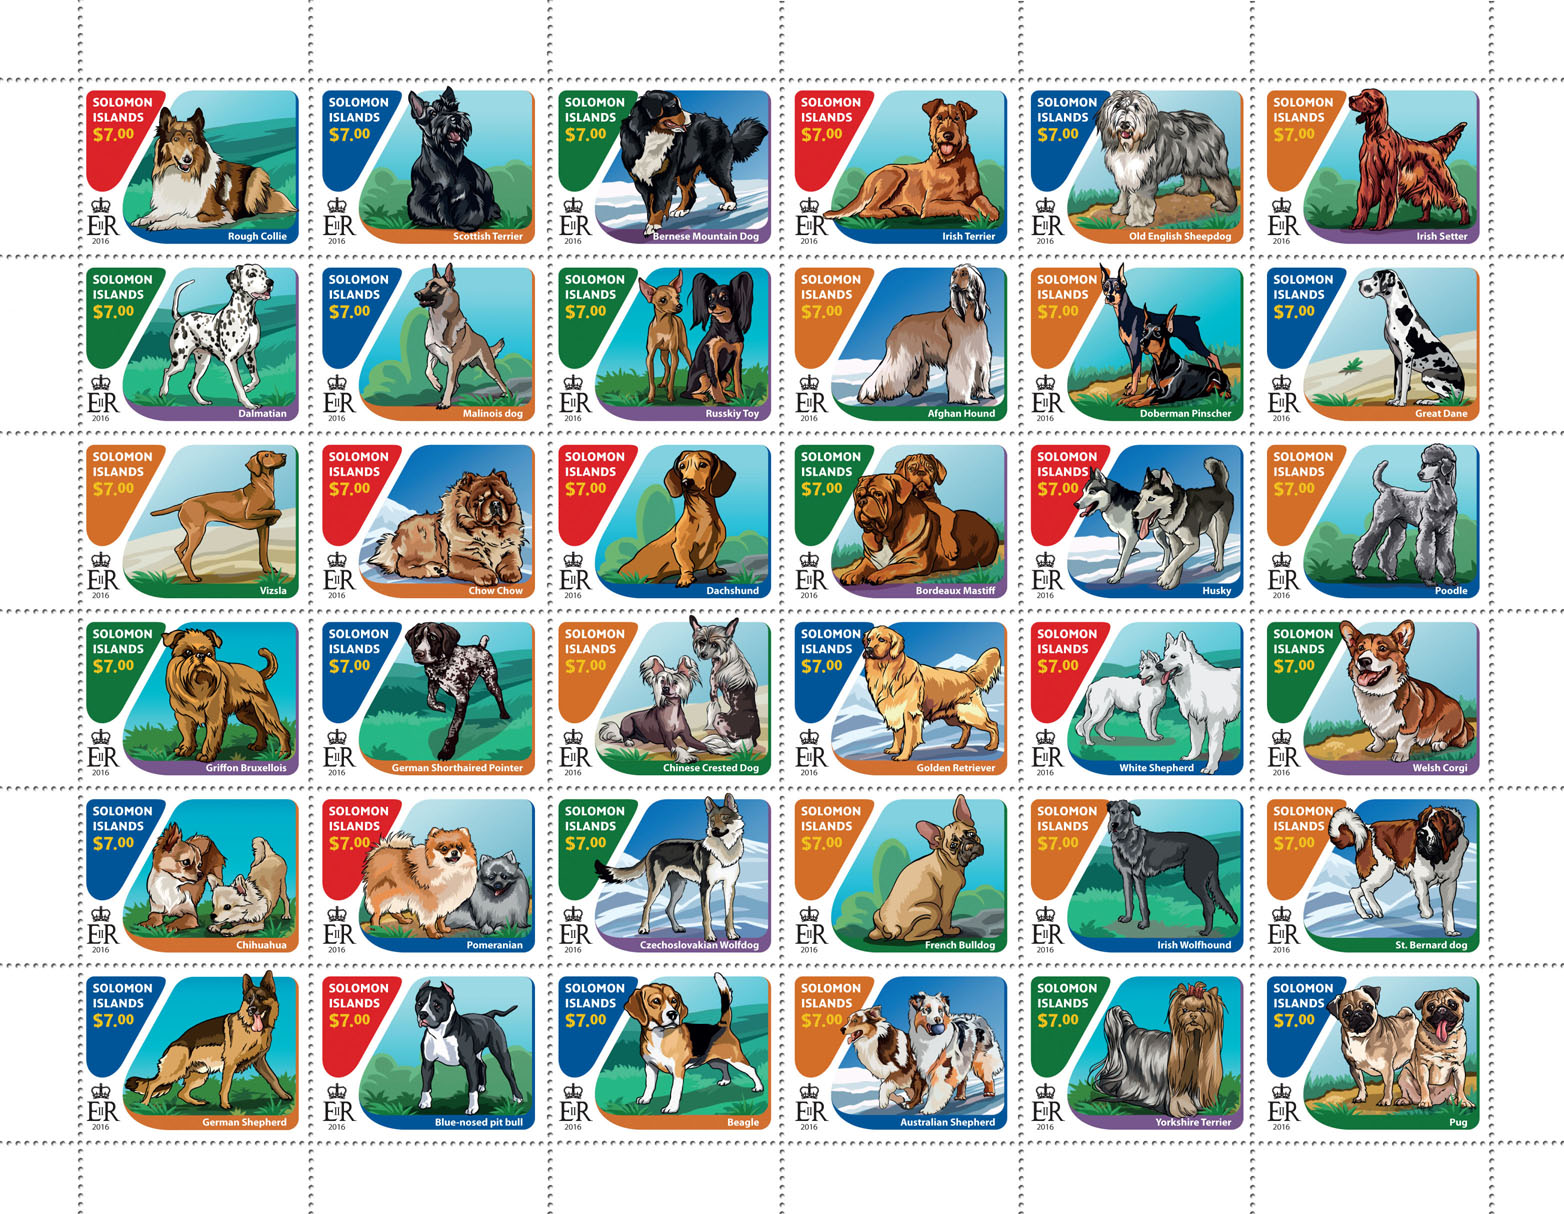 Dogs - Issue of Solomon islands postage stamps